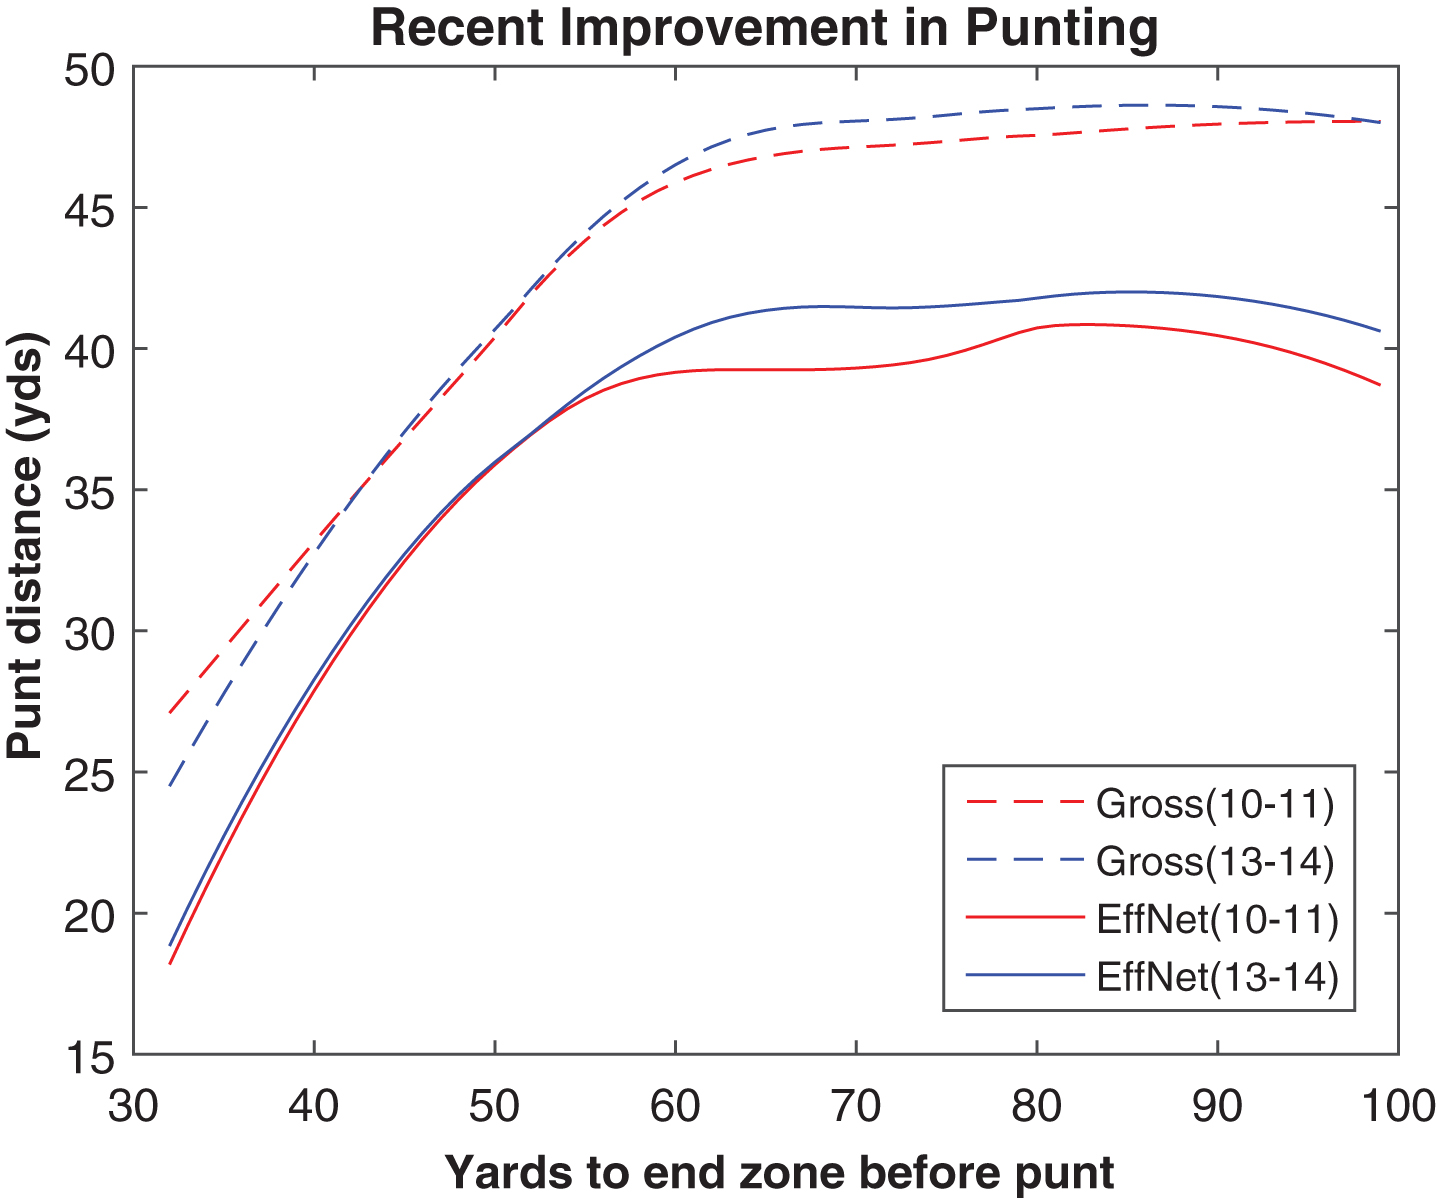 Gross and effective net punting by field position, 2010-11 and 2013-14.